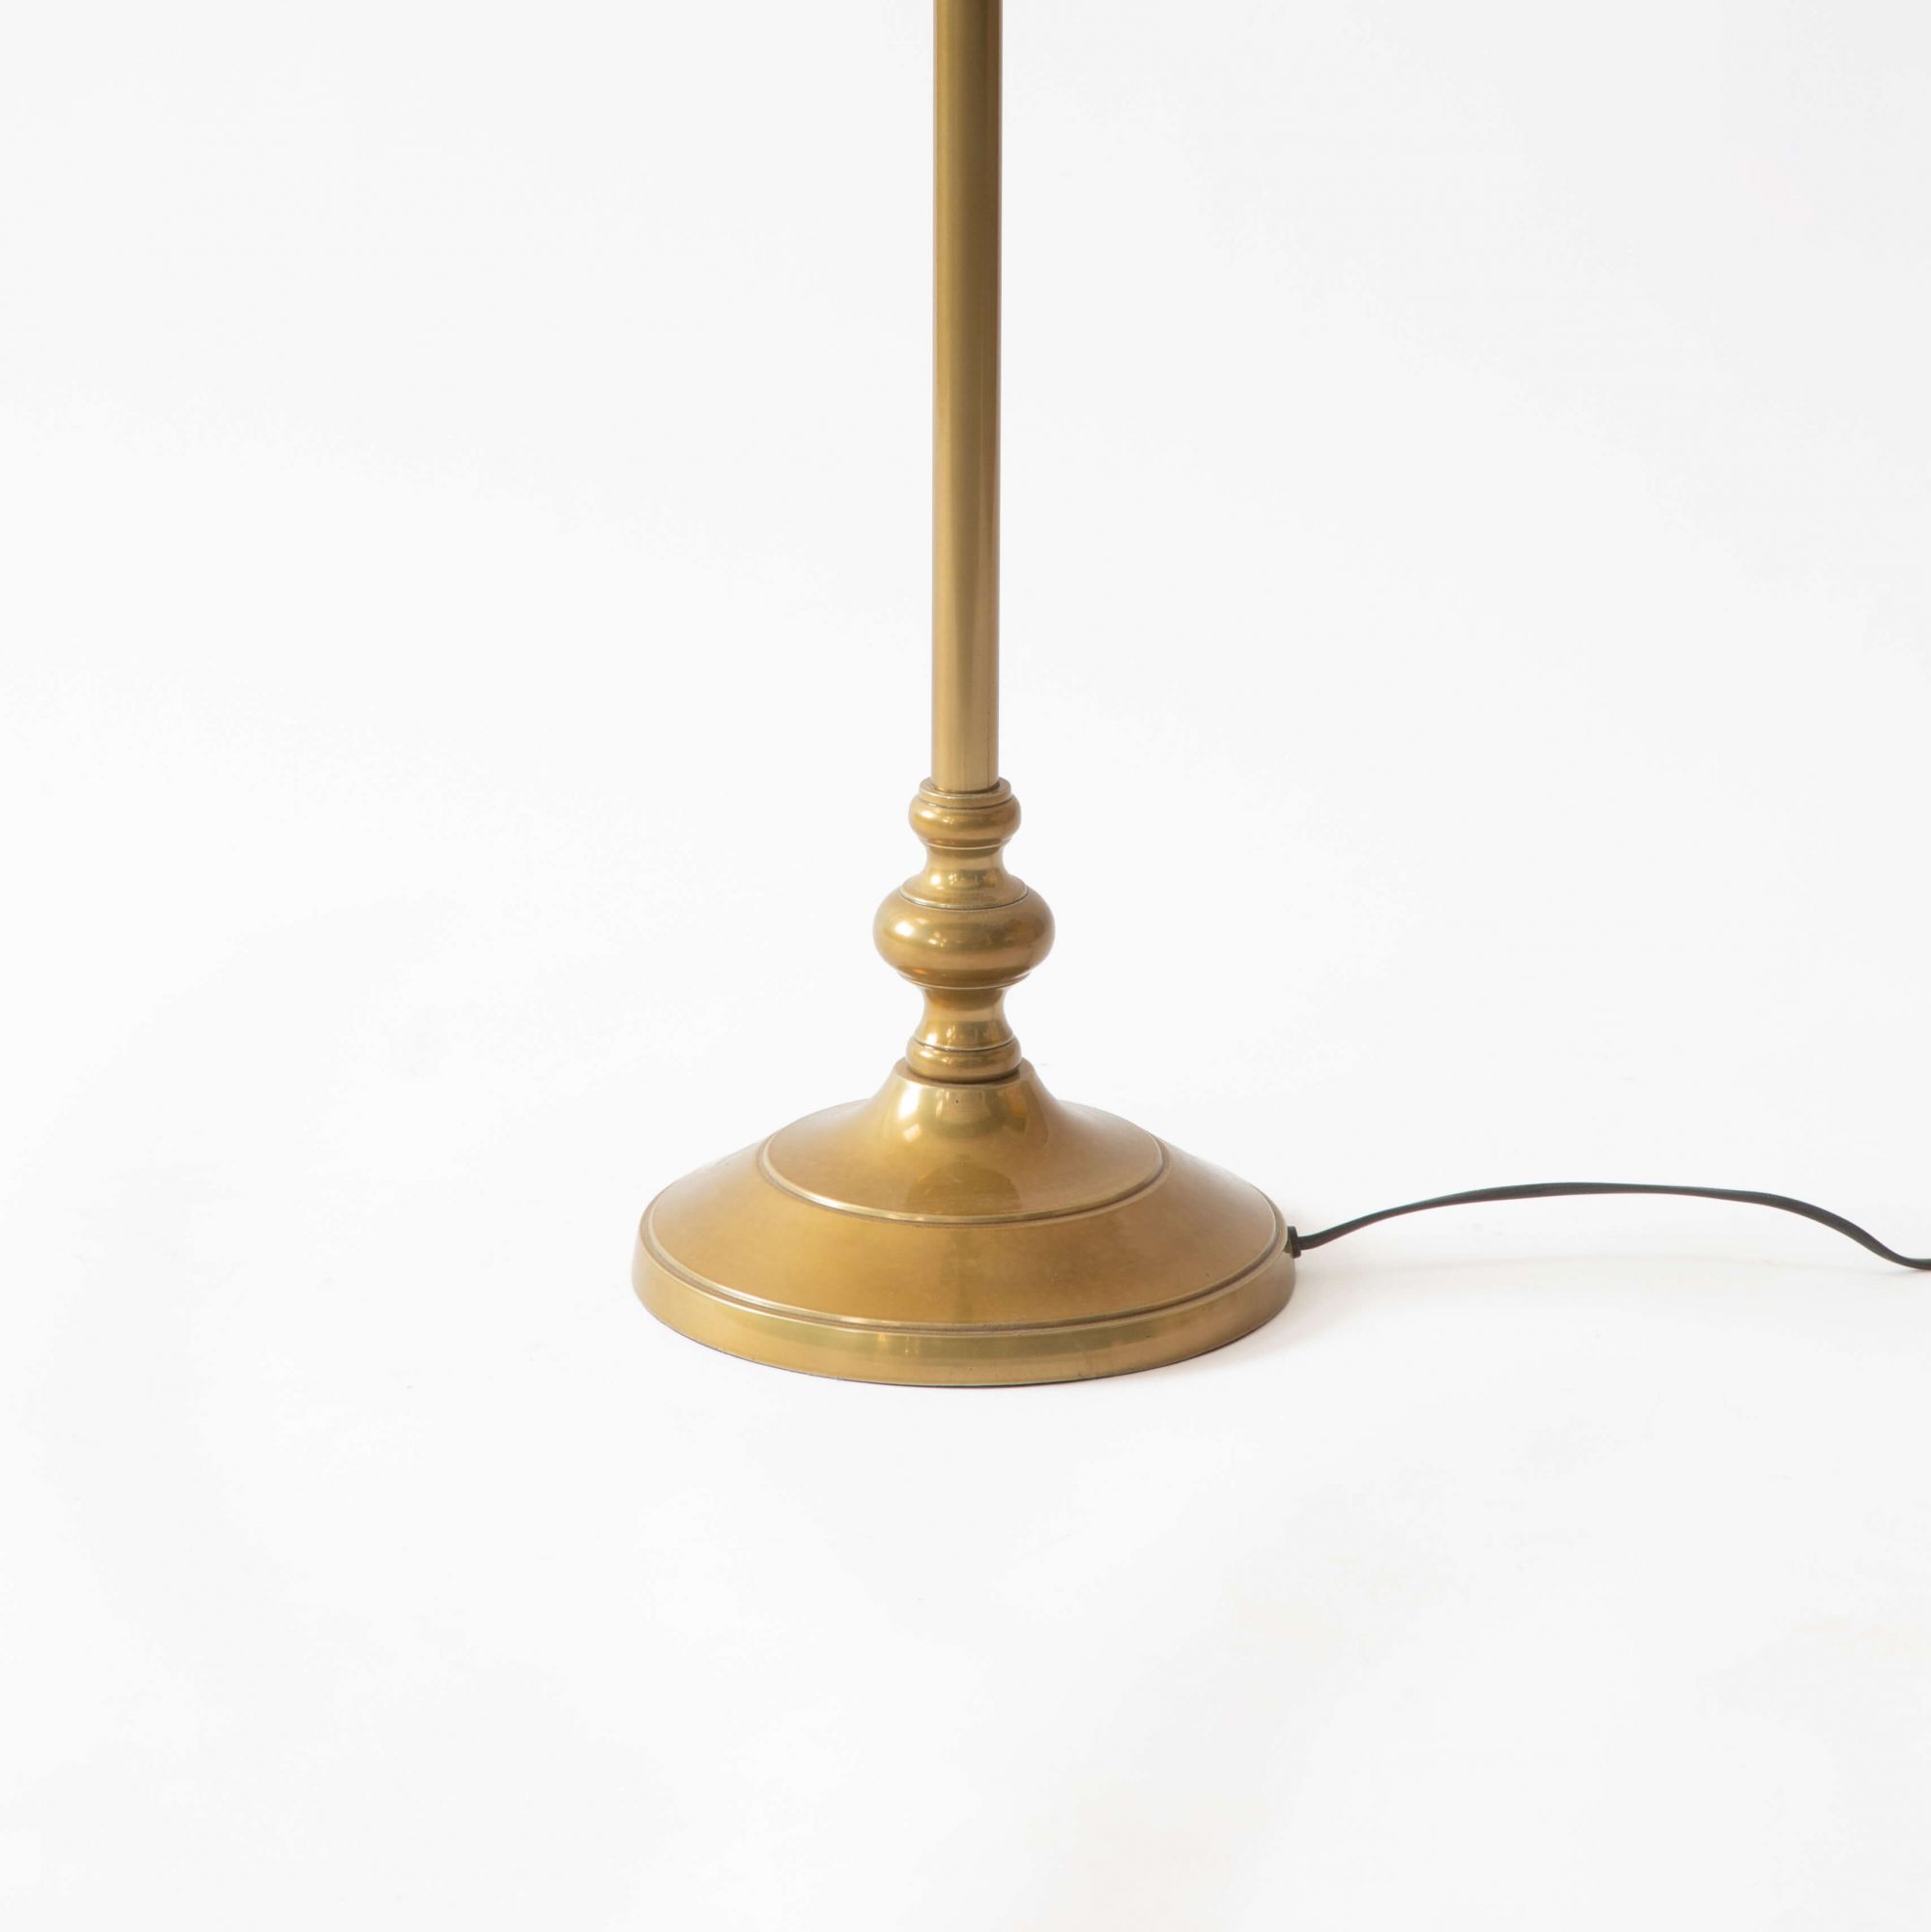 The Royal Palm Floor Lamp - Antique Brass